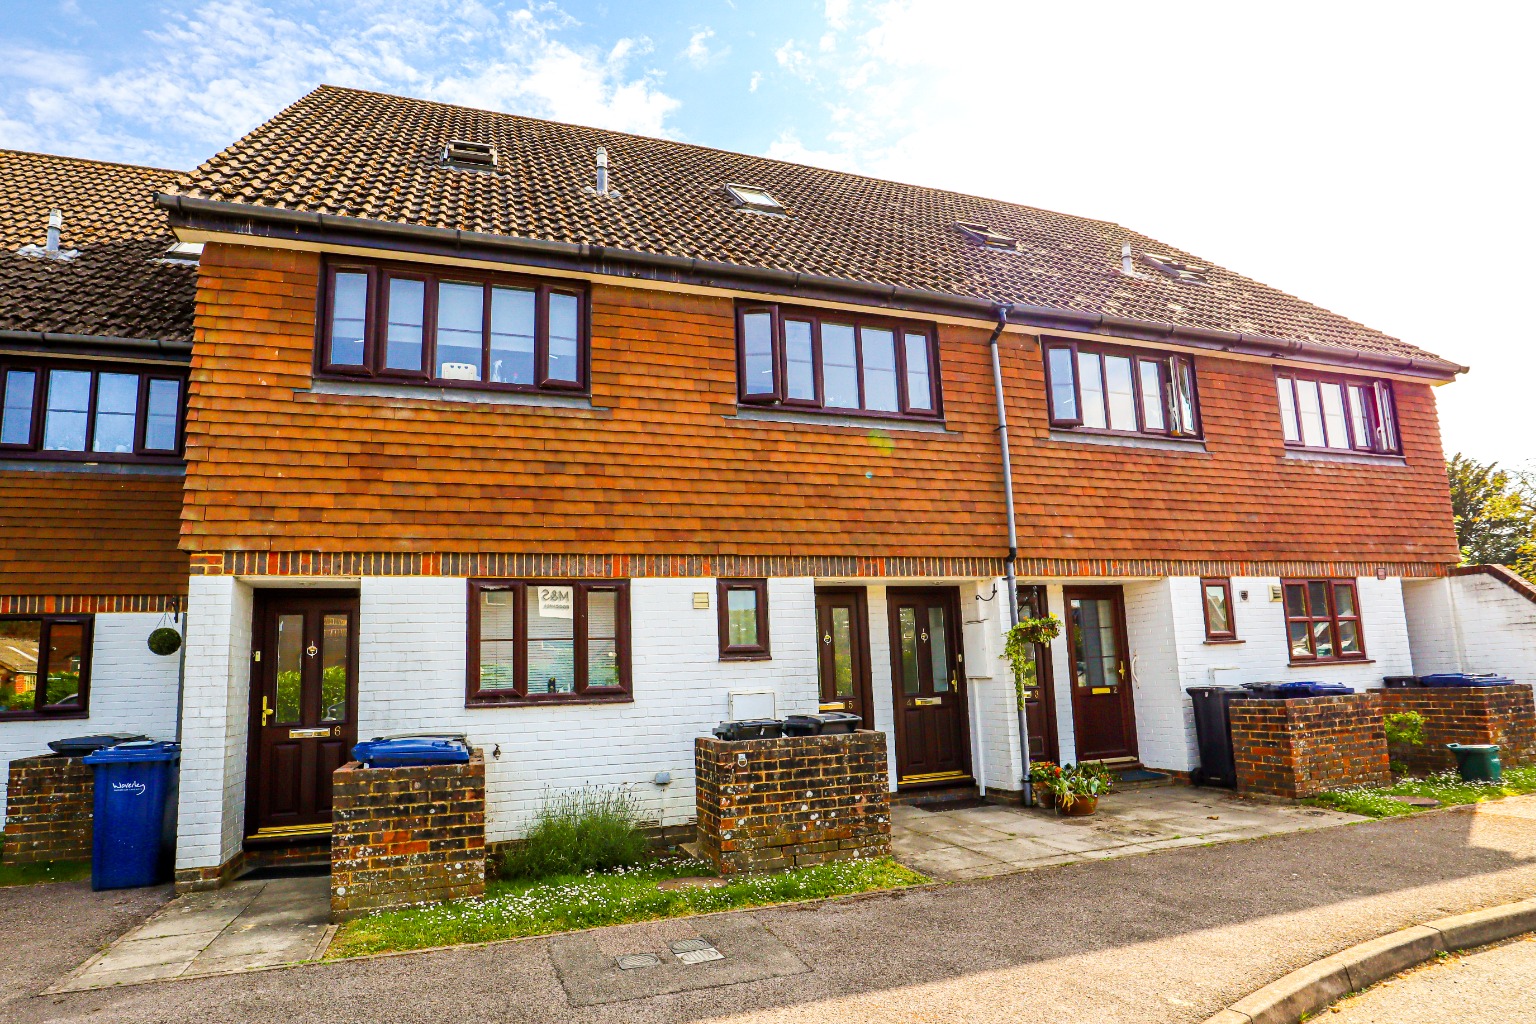 Presented to the market this bright & airy 1 bedroom split level maisonette located in a sought after residential location, within a moments walk from Cranleigh High Street & Marks & Spencers. This property is presented in lovely condition throughout, offers a great sized lounge/dining room with Jul